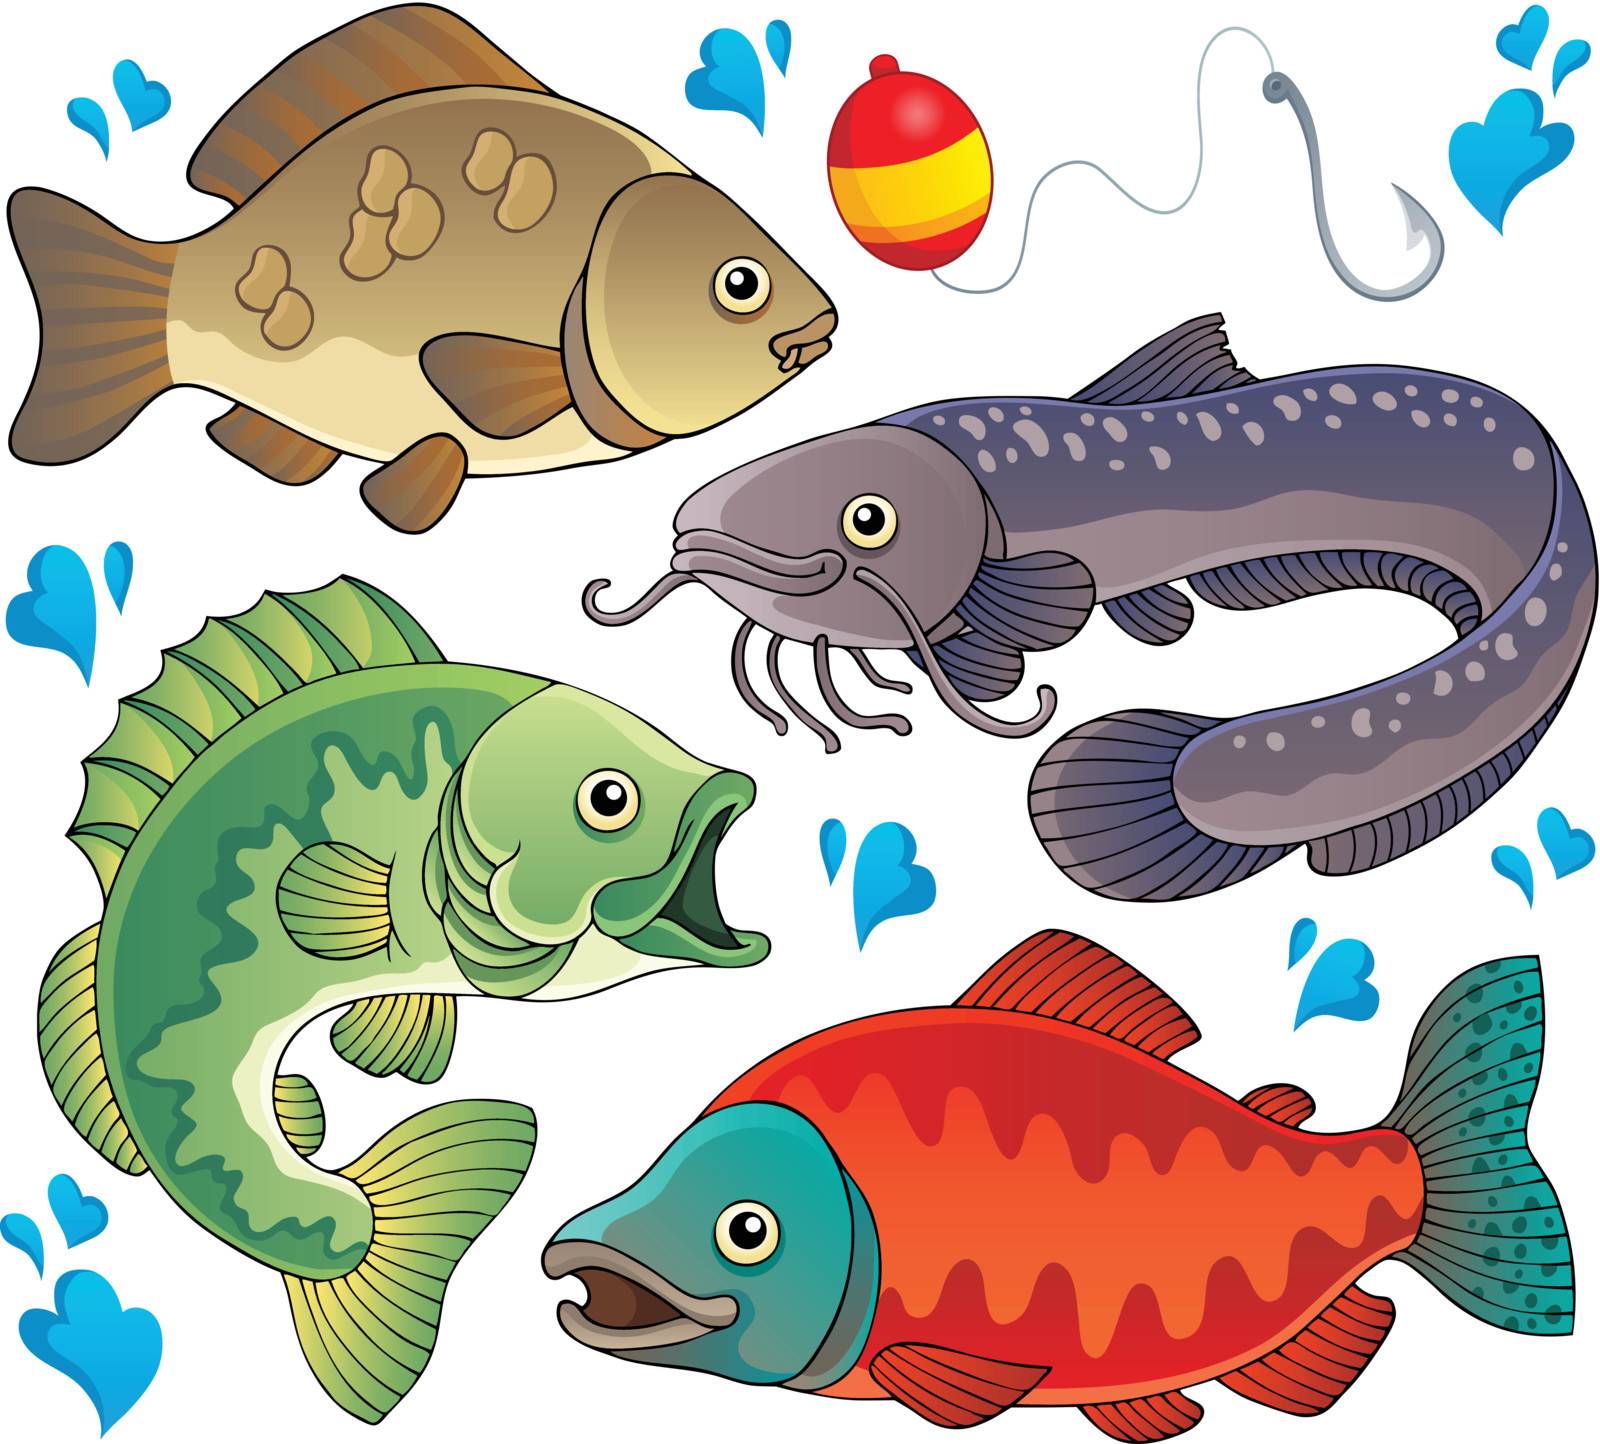 Various freshwater fishes 2 - vector illustration.